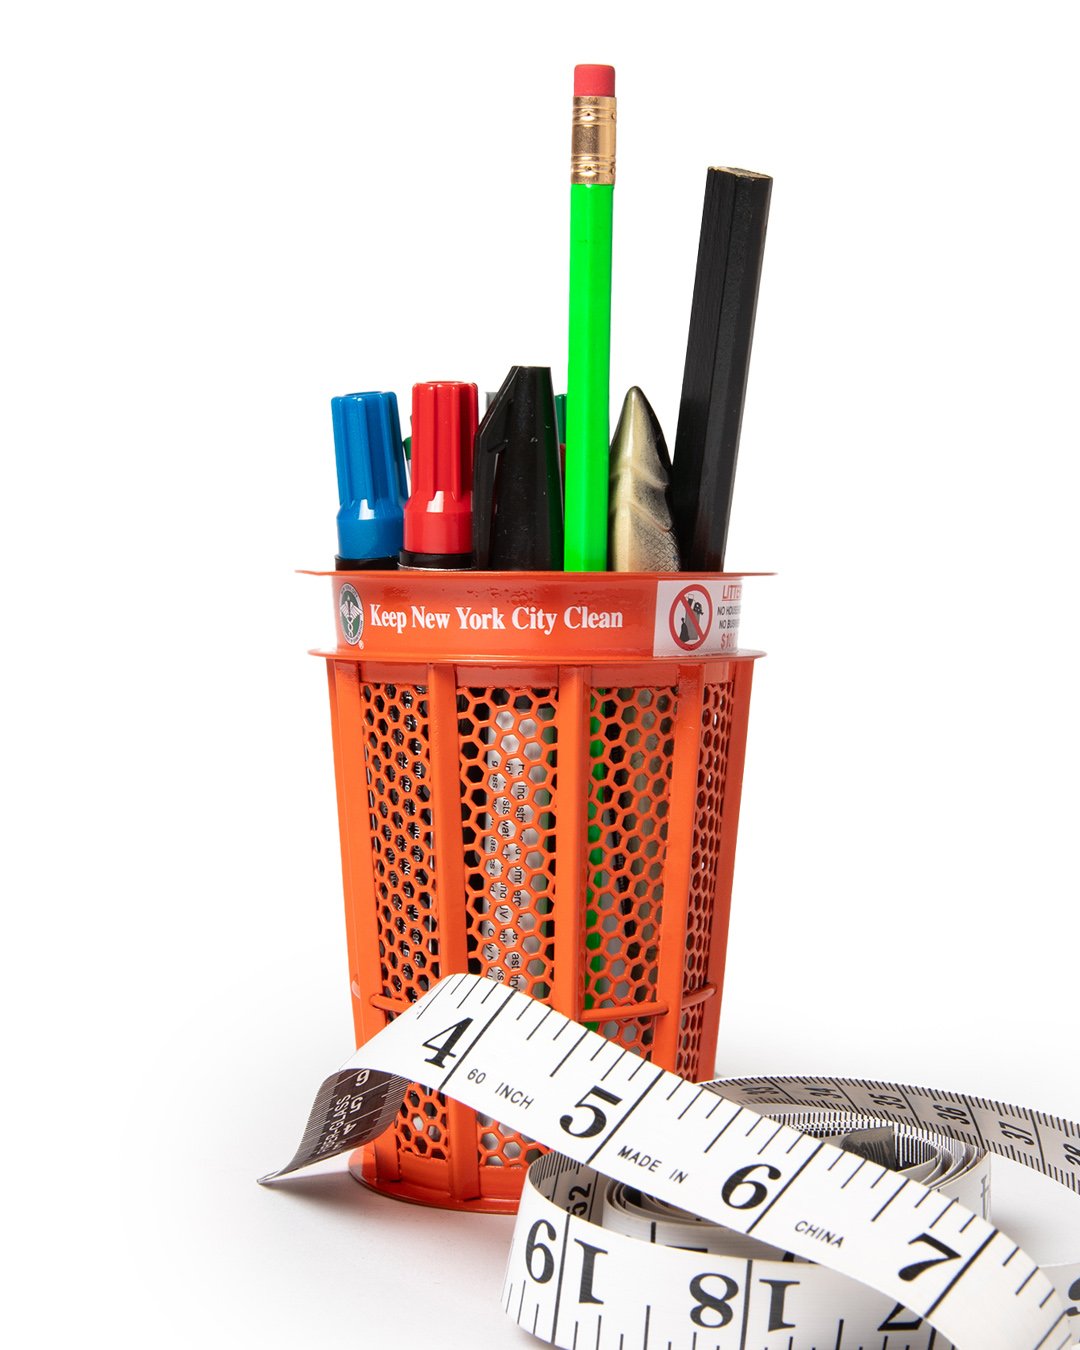 Only NY Trash Can Pen Holder